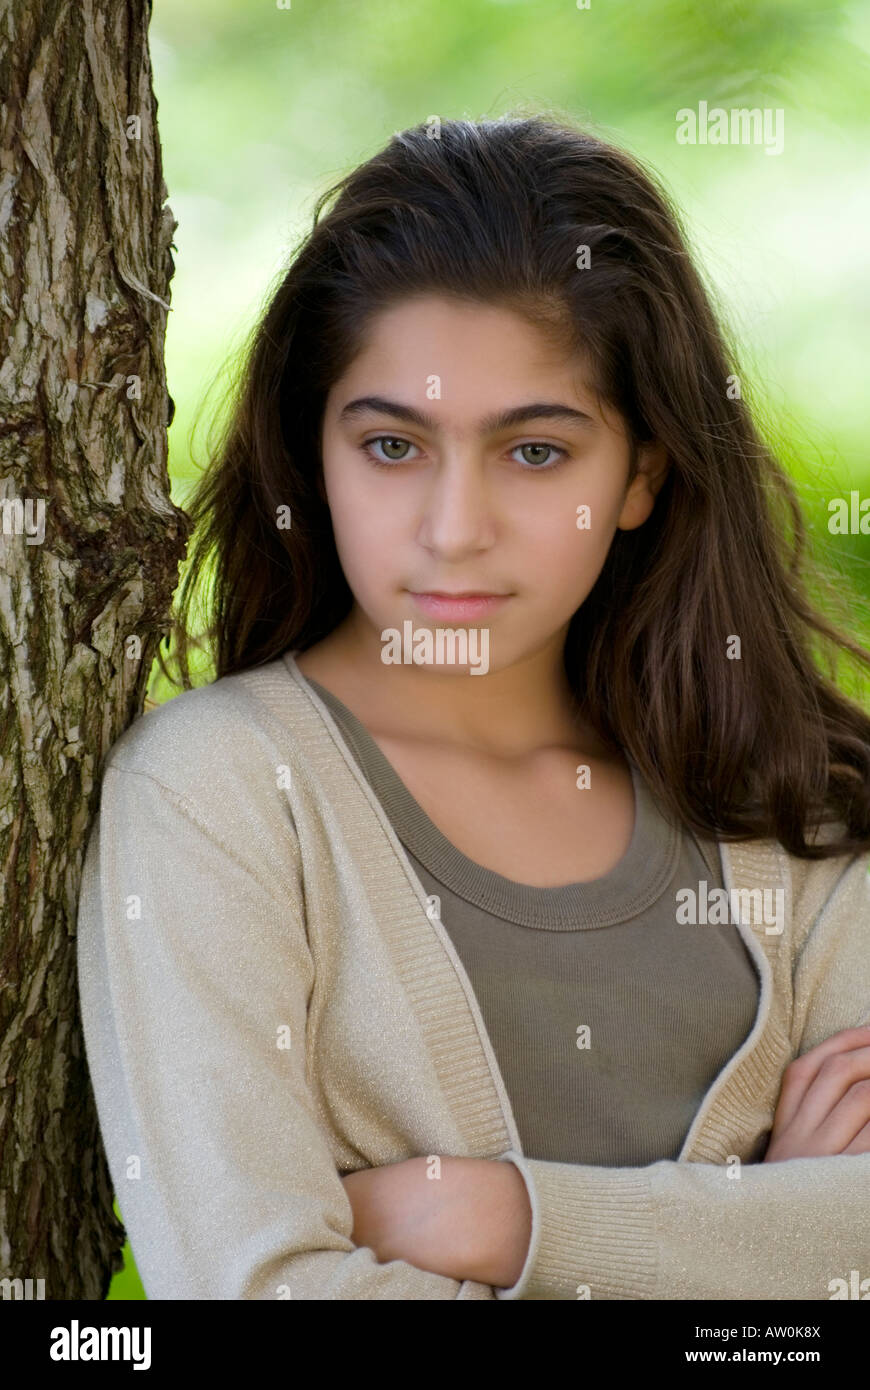 Serious 11 years old girl arms folded looking down Stock Photo